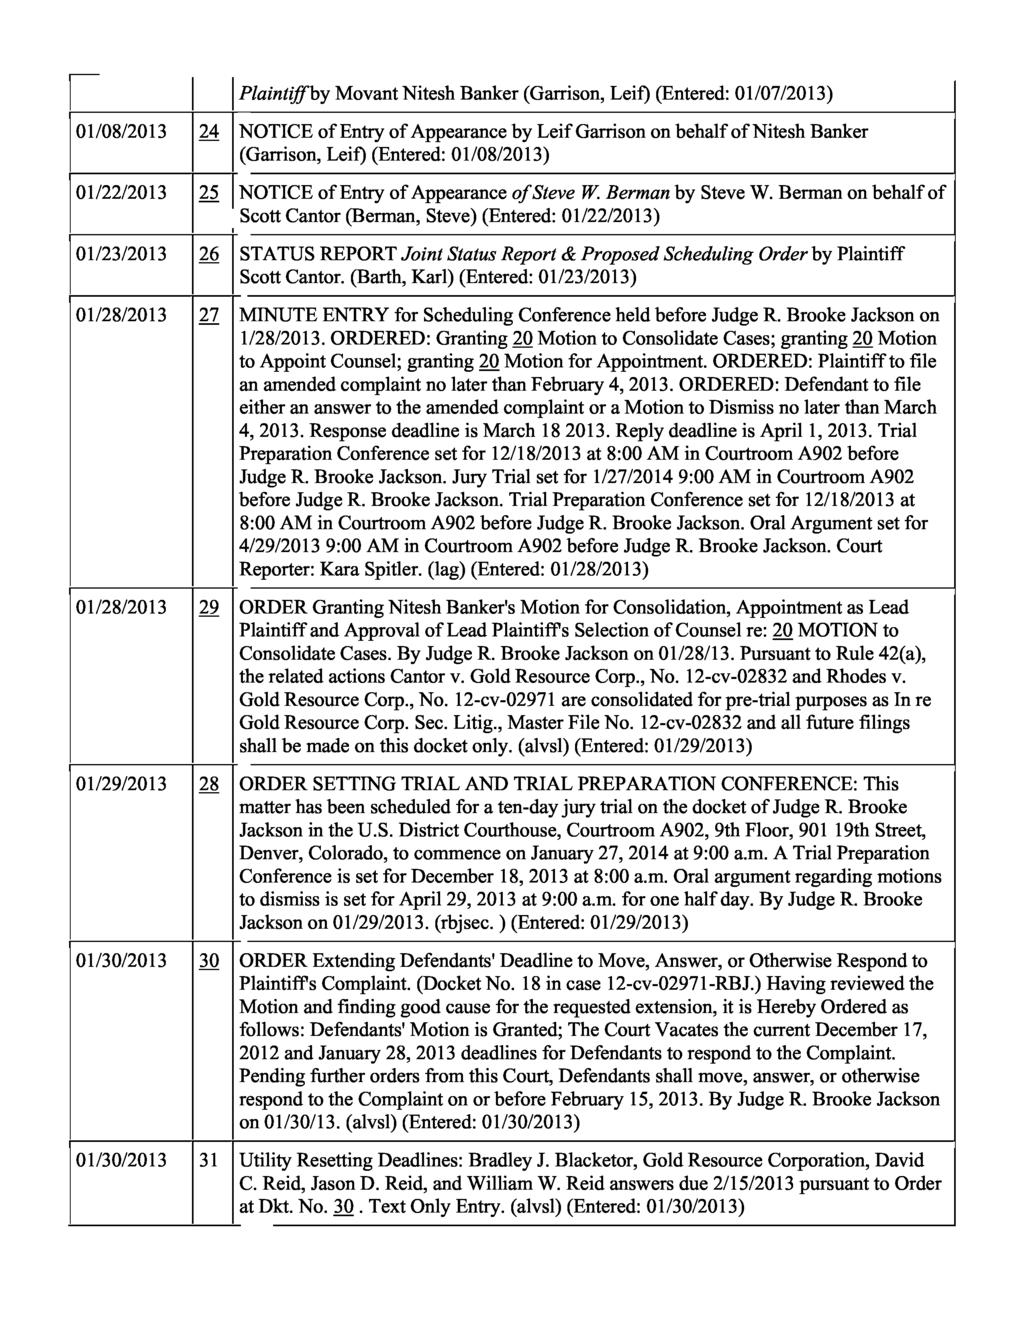 Plaintiff by Movant Nitesh Banker (Garrison, Leif) (Entered: 01/07/2013) 01/08/2013 24 NOTICE of Entry of Appearance by Leif Garrison on behalf of Nitesh Banker (Garrison, Leif) (Entered: 01/08/2013)